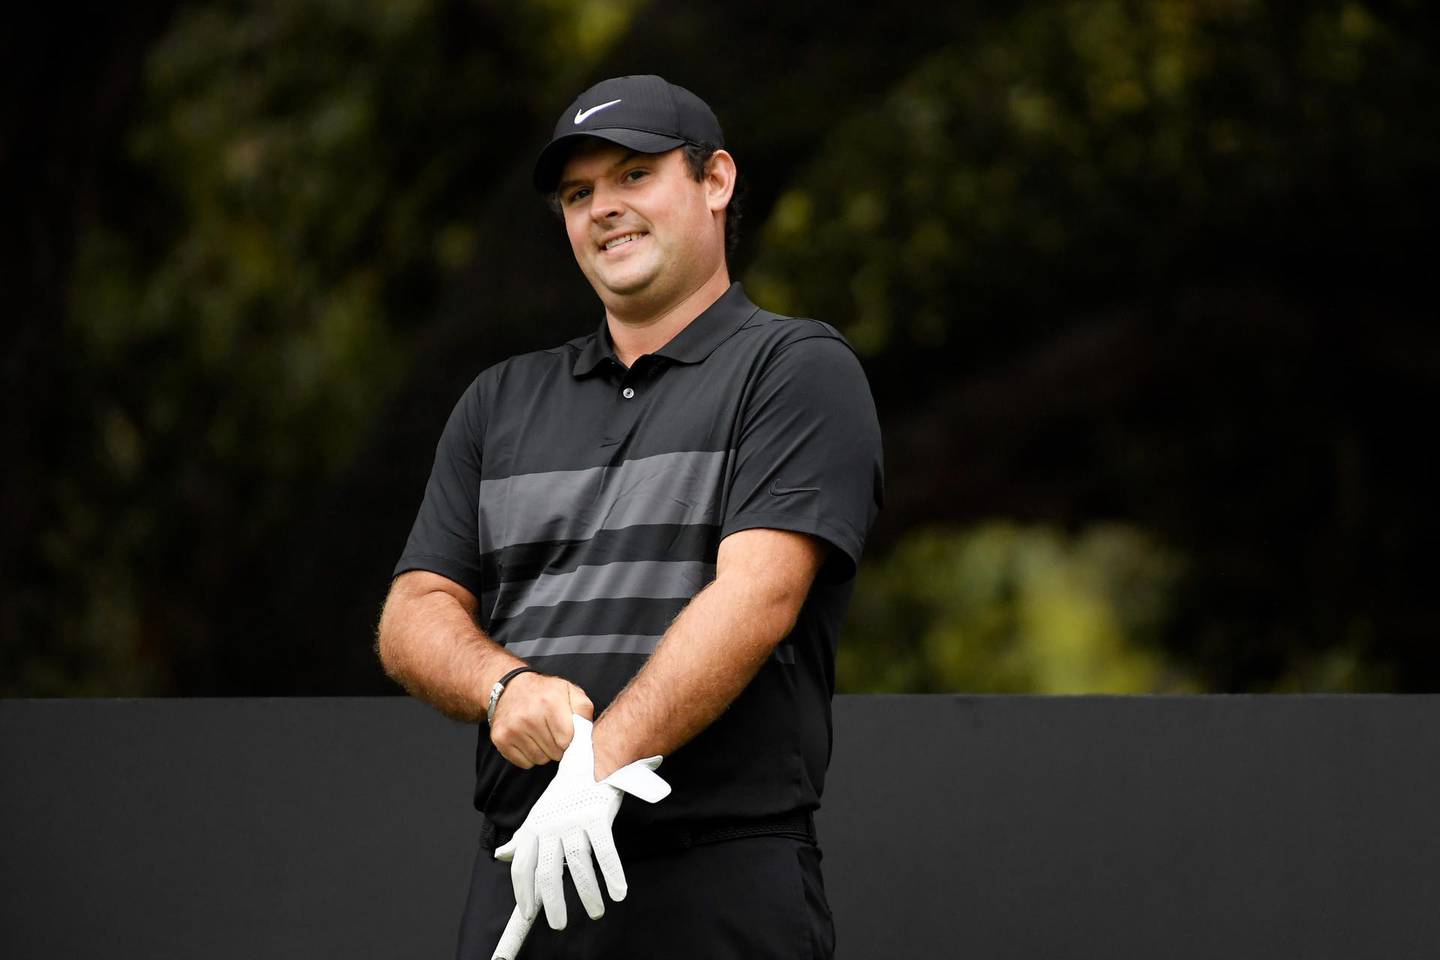 THOUSAND OAKS, CALIFORNIA - OCTOBER 25: Patrick Reed of the United States prepares to play from the secnd during the final round of the Zozo Championship @ Sherwood on October 25, 2020 in Thousand Oaks, California.   Harry How/Getty Images/AFP
== FOR NEWSPAPERS, INTERNET, TELCOS & TELEVISION USE ONLY ==
